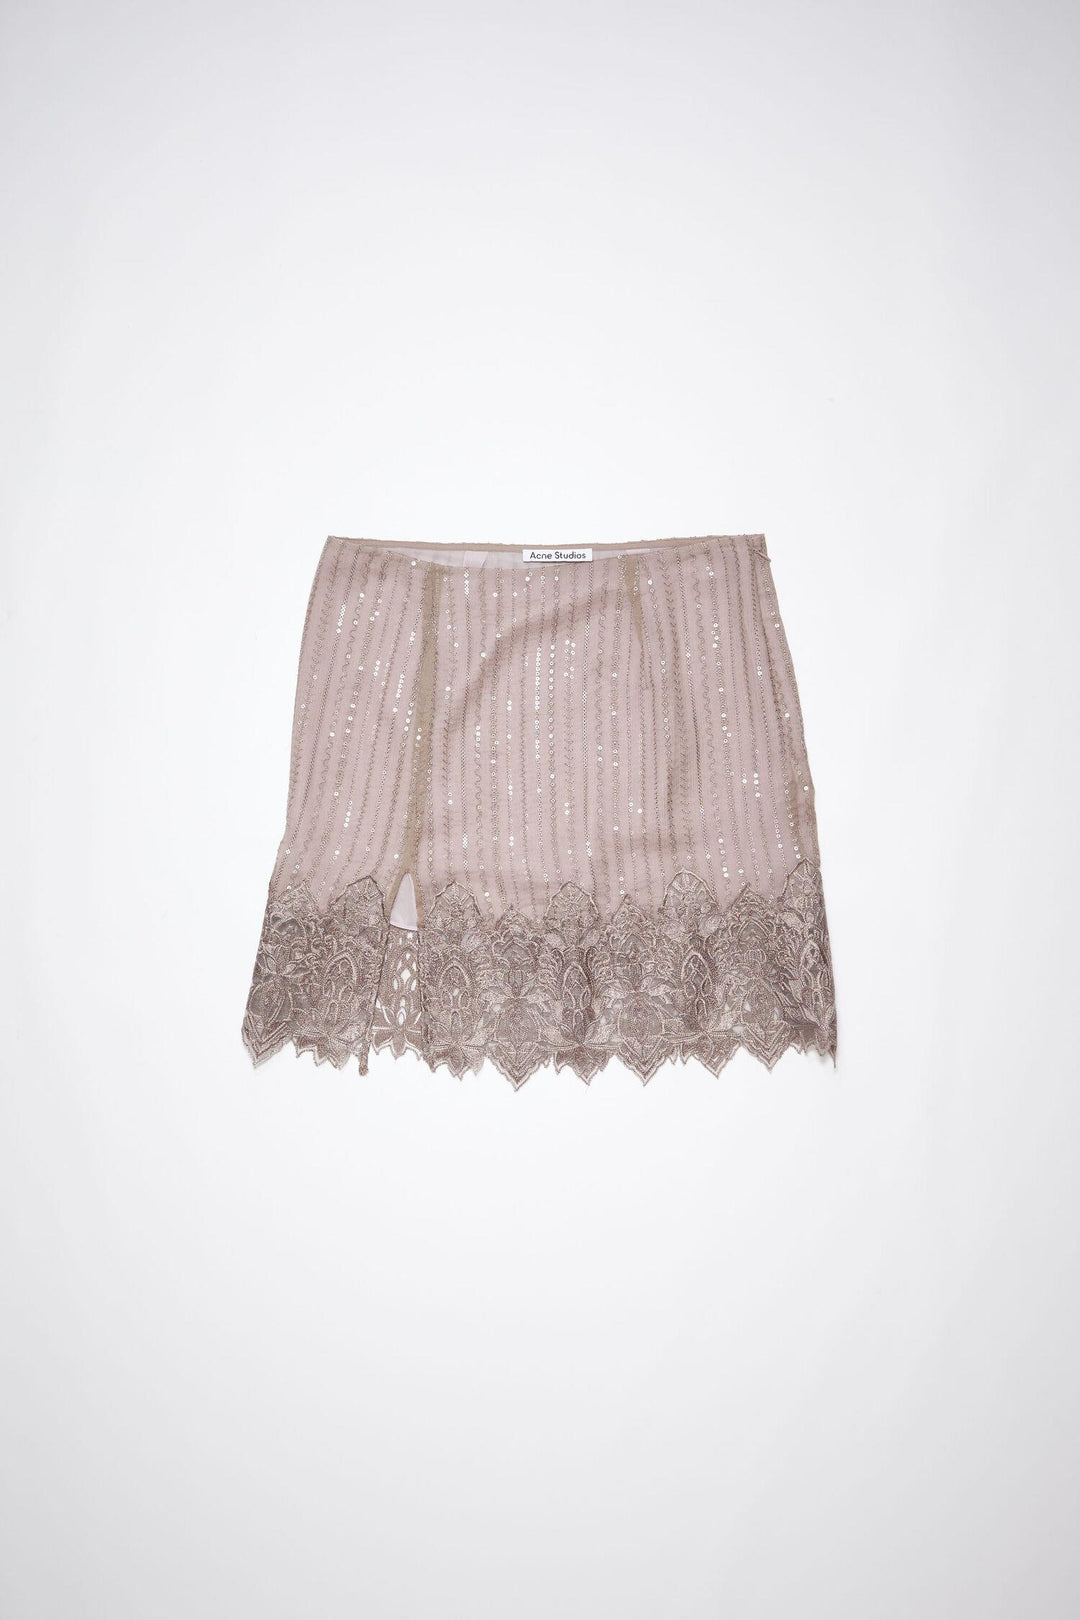 ACNE STUDIOS - Embroidered Skirt - Dale